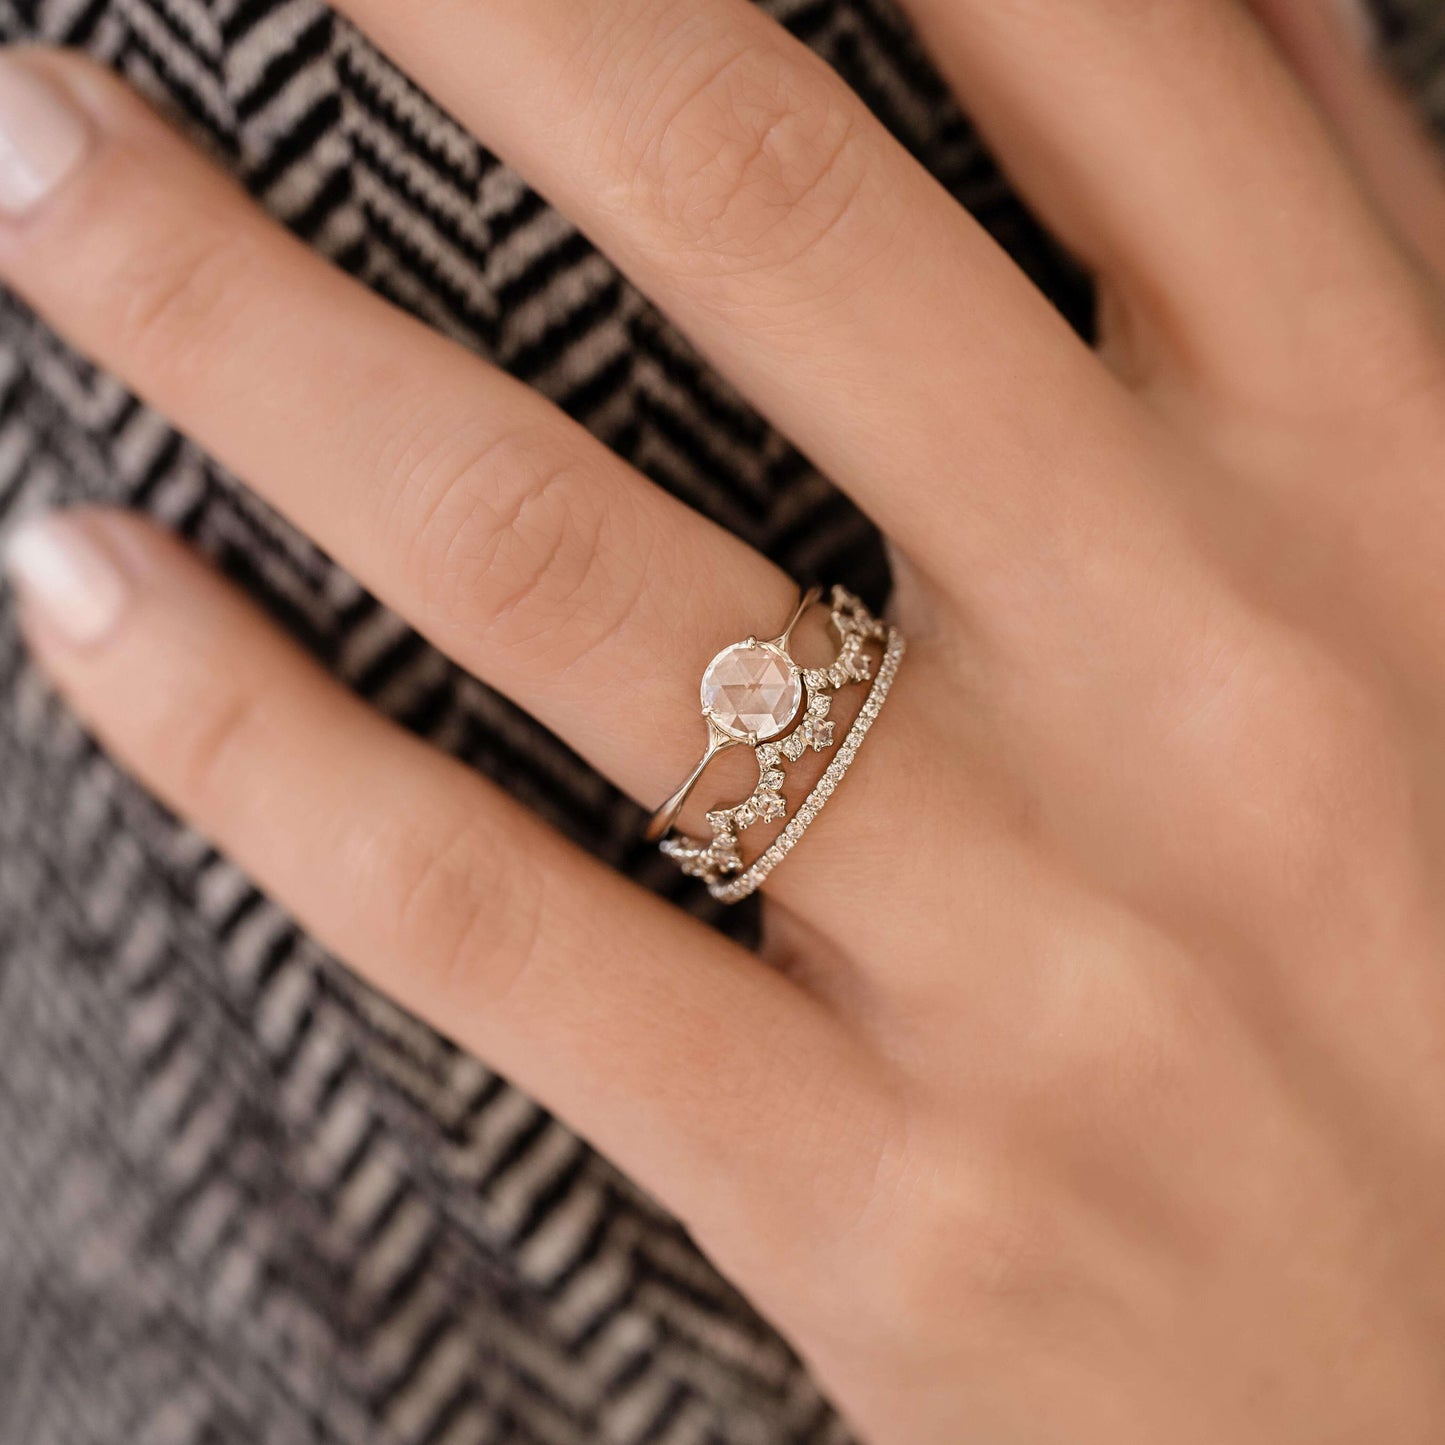 Lace Edge Ring - In Stock